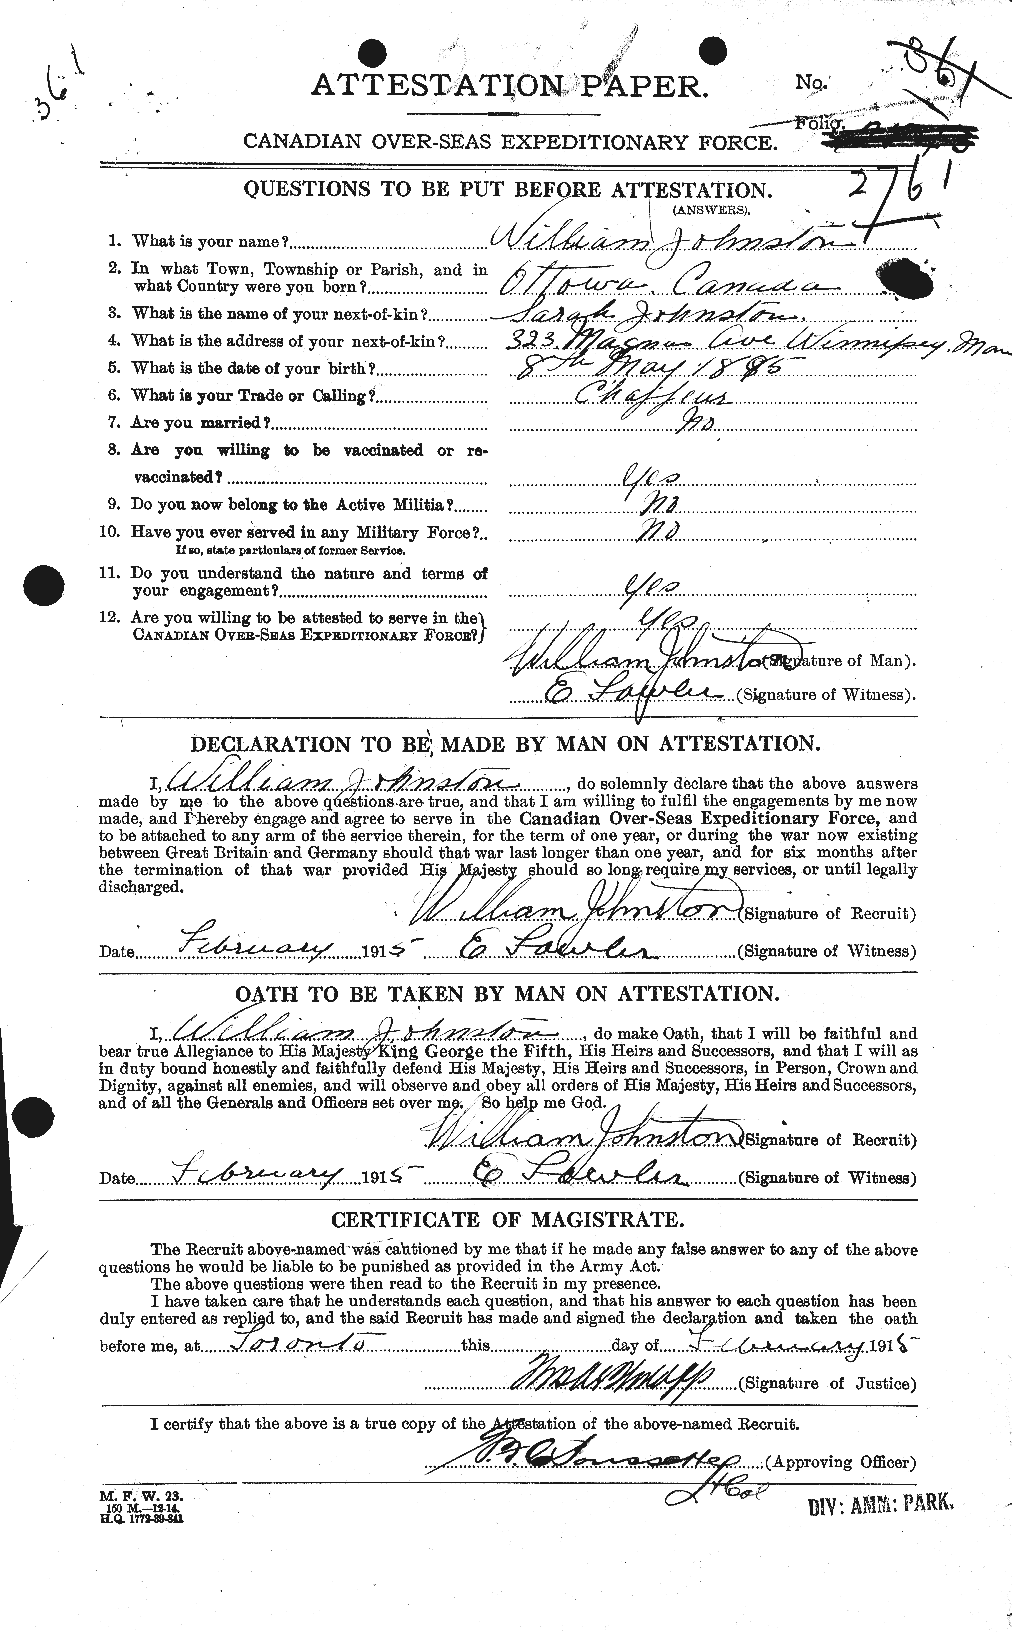 Personnel Records of the First World War - CEF 427231a